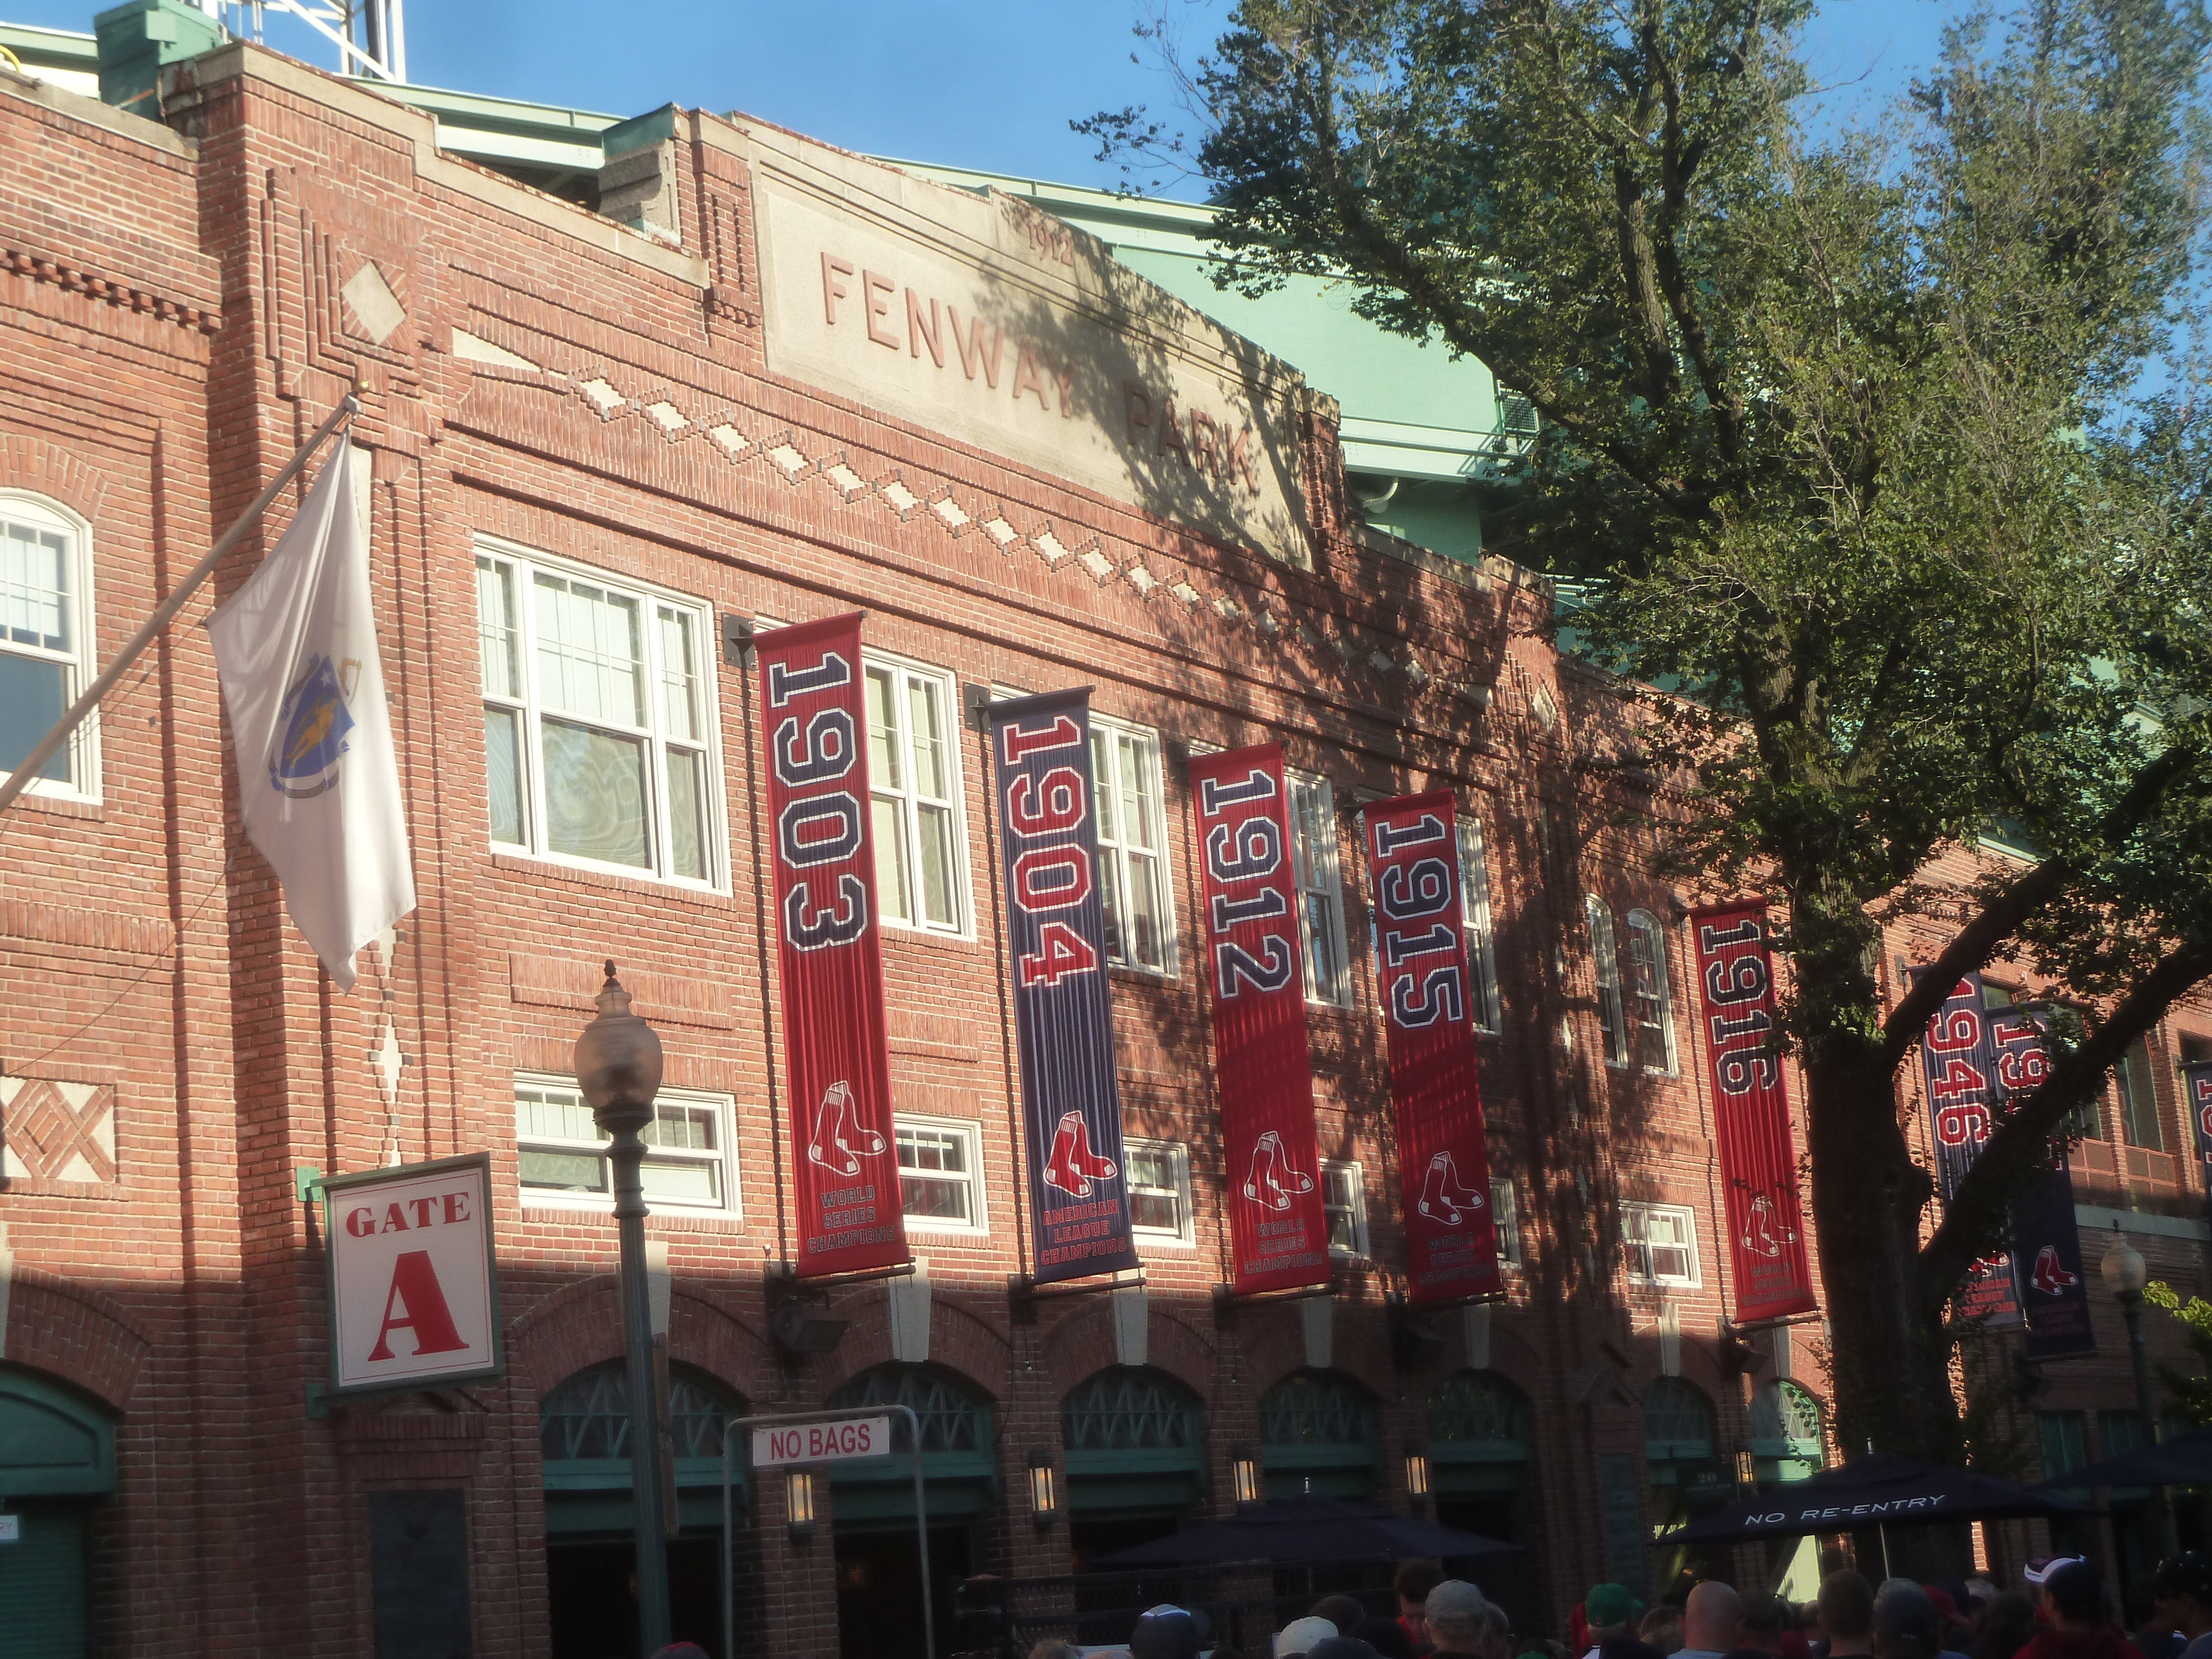 What does plan to make Fenway Park carbon-neutral mean for fans?